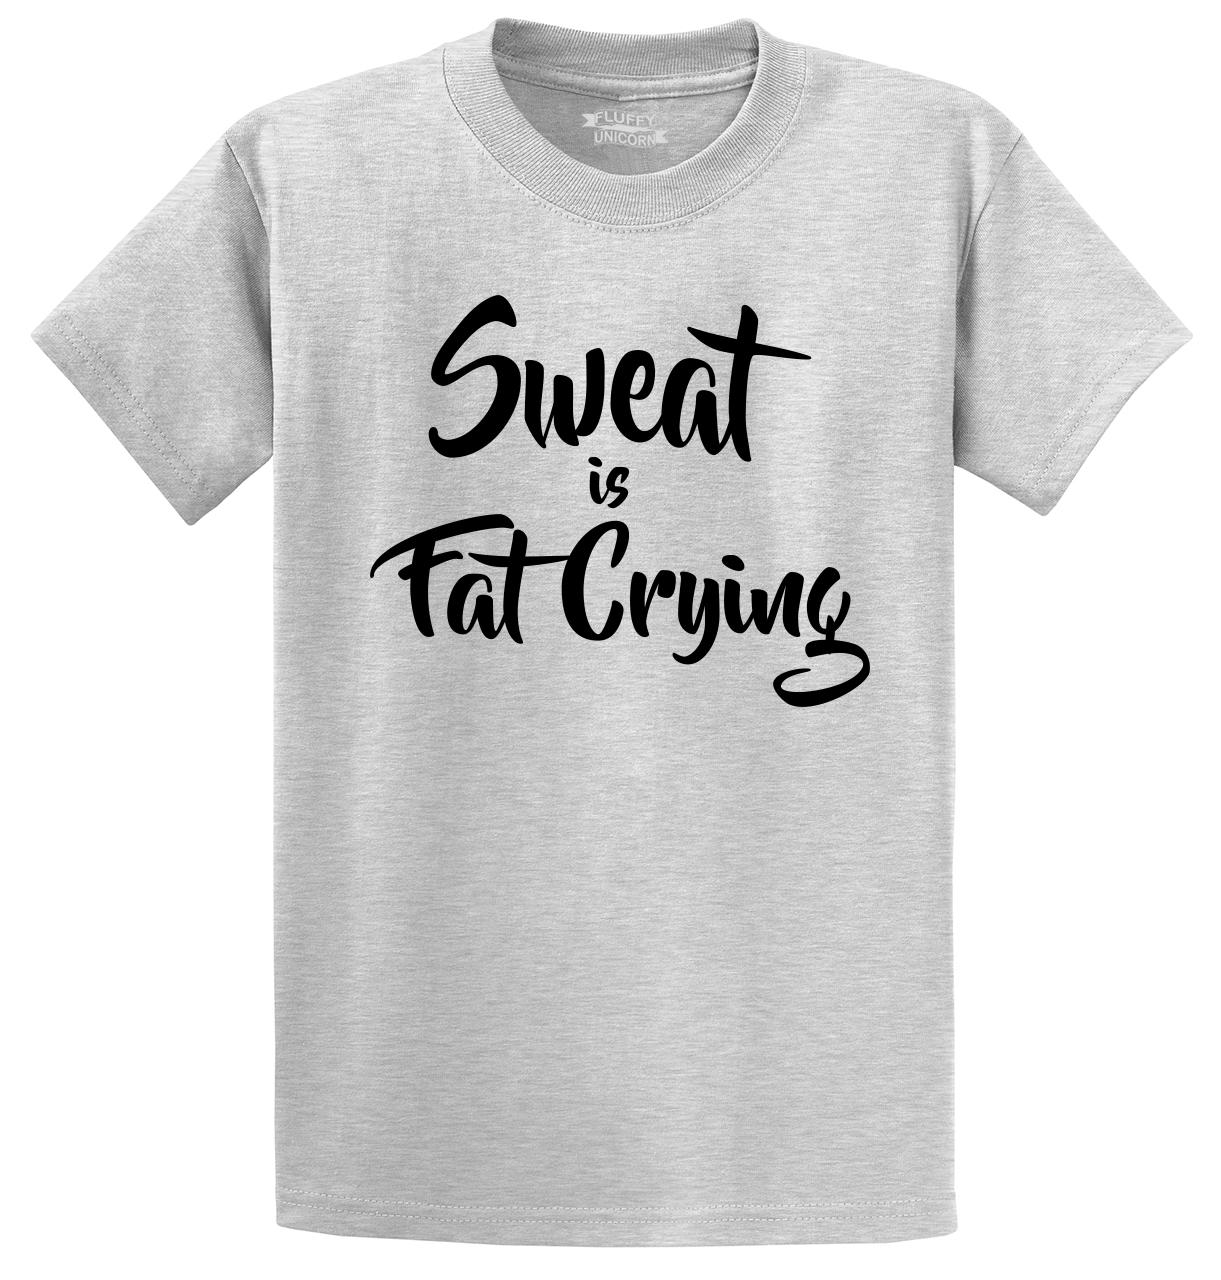 Gym Bodybuilding T-Shirt Funny Mens Sports Performance Tee Sweat Is Fat Crying 